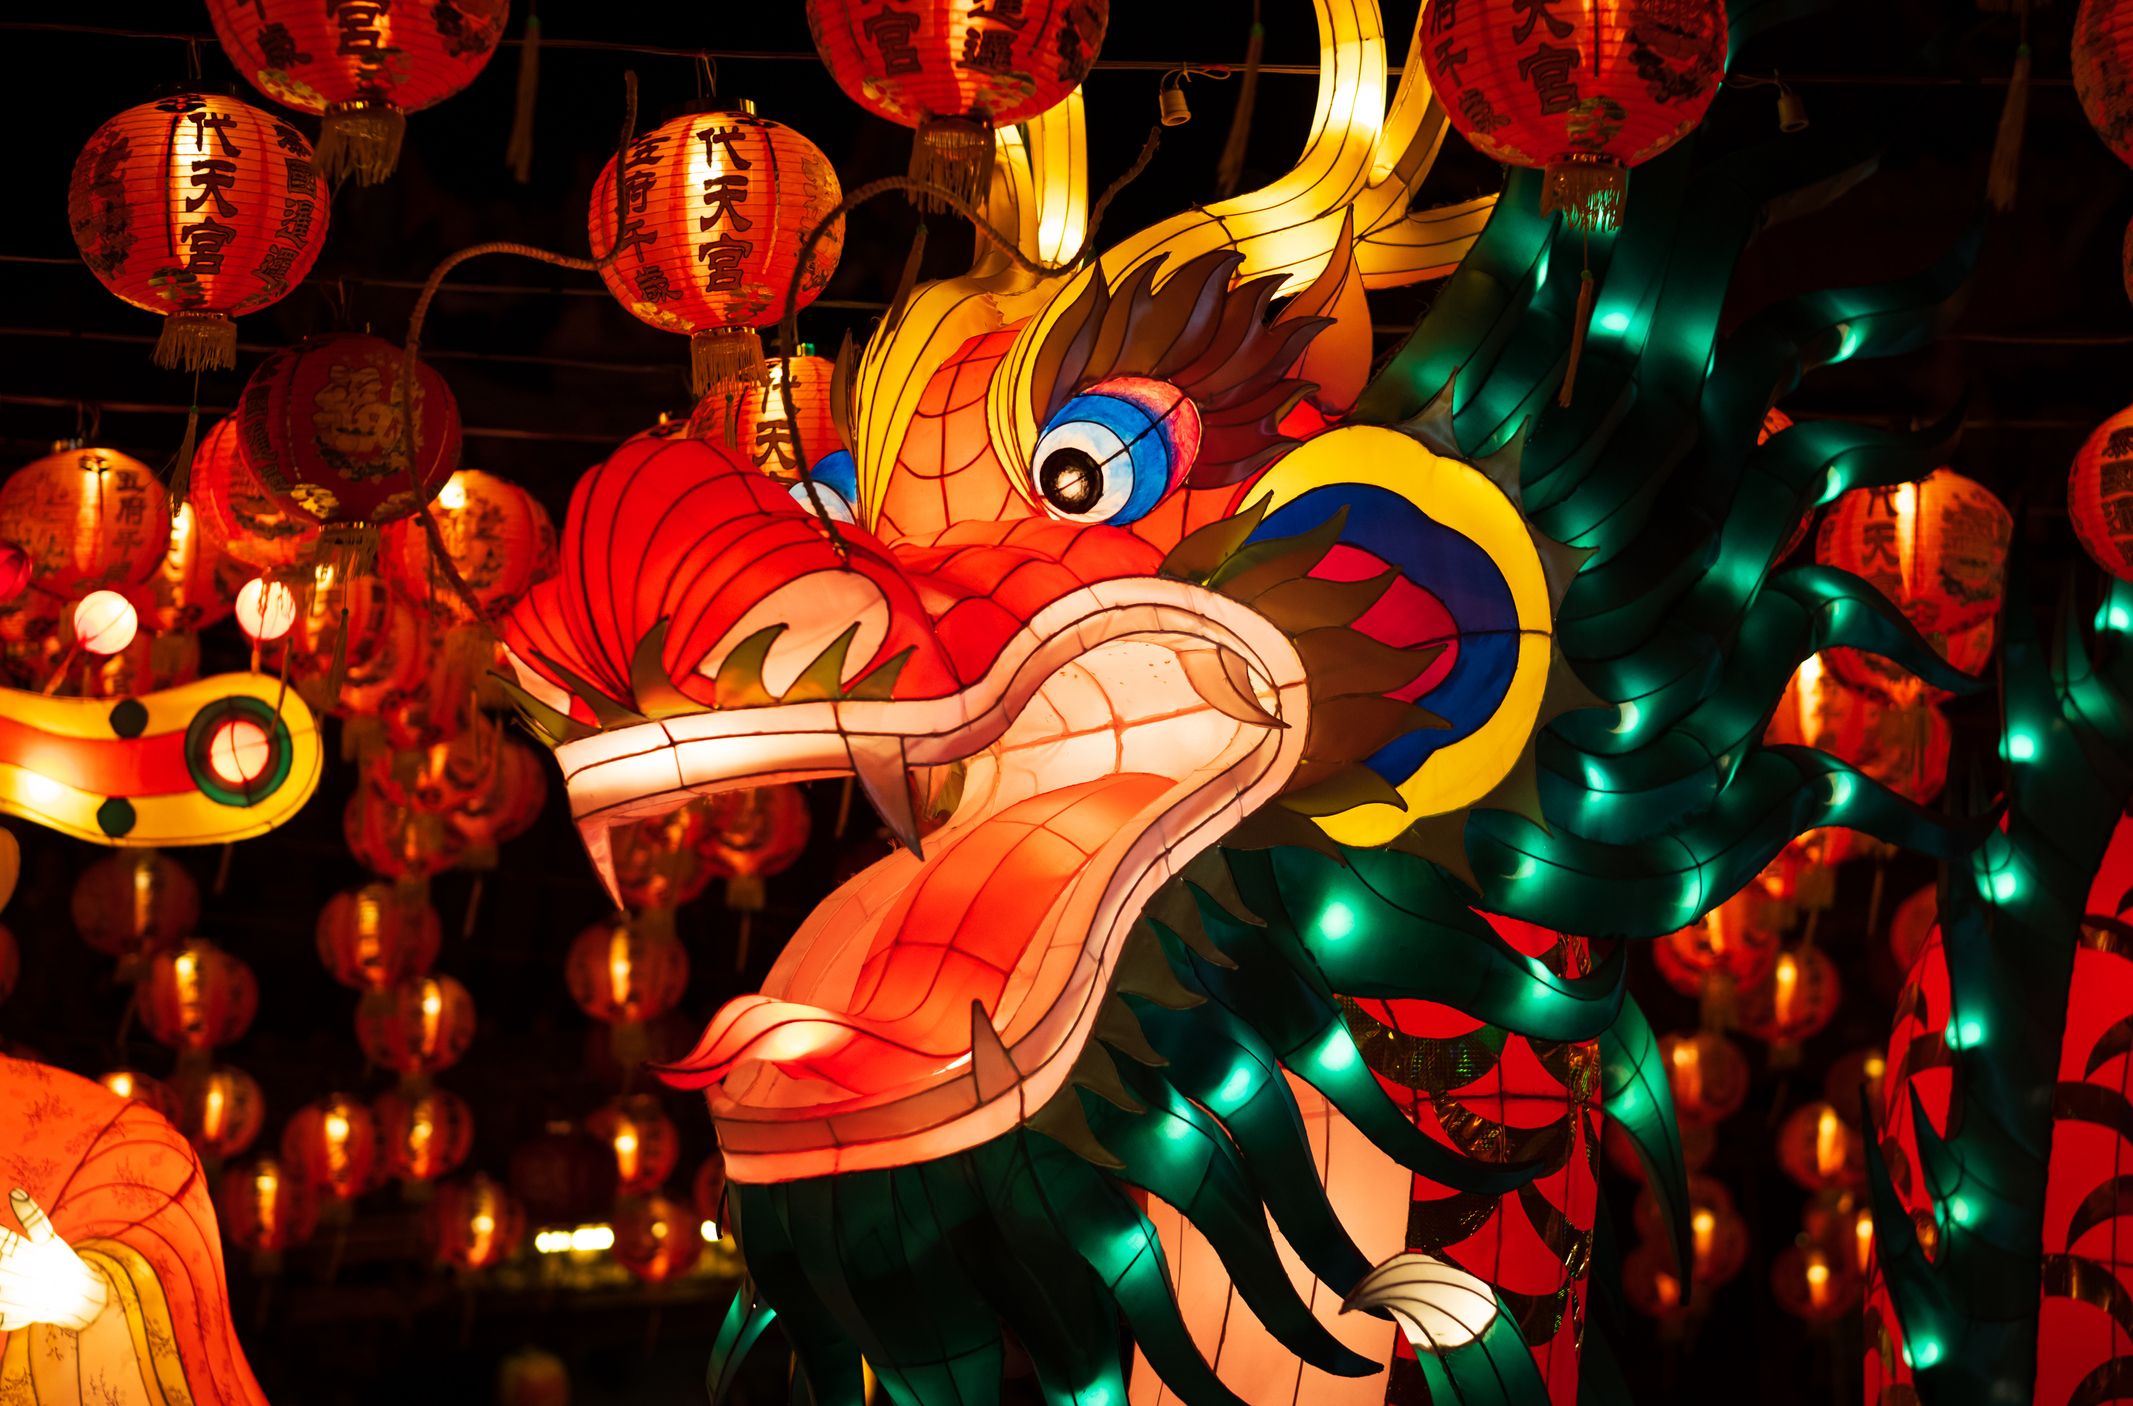 Lunar New Year is upon us; enjoy our beautiful decor throughout